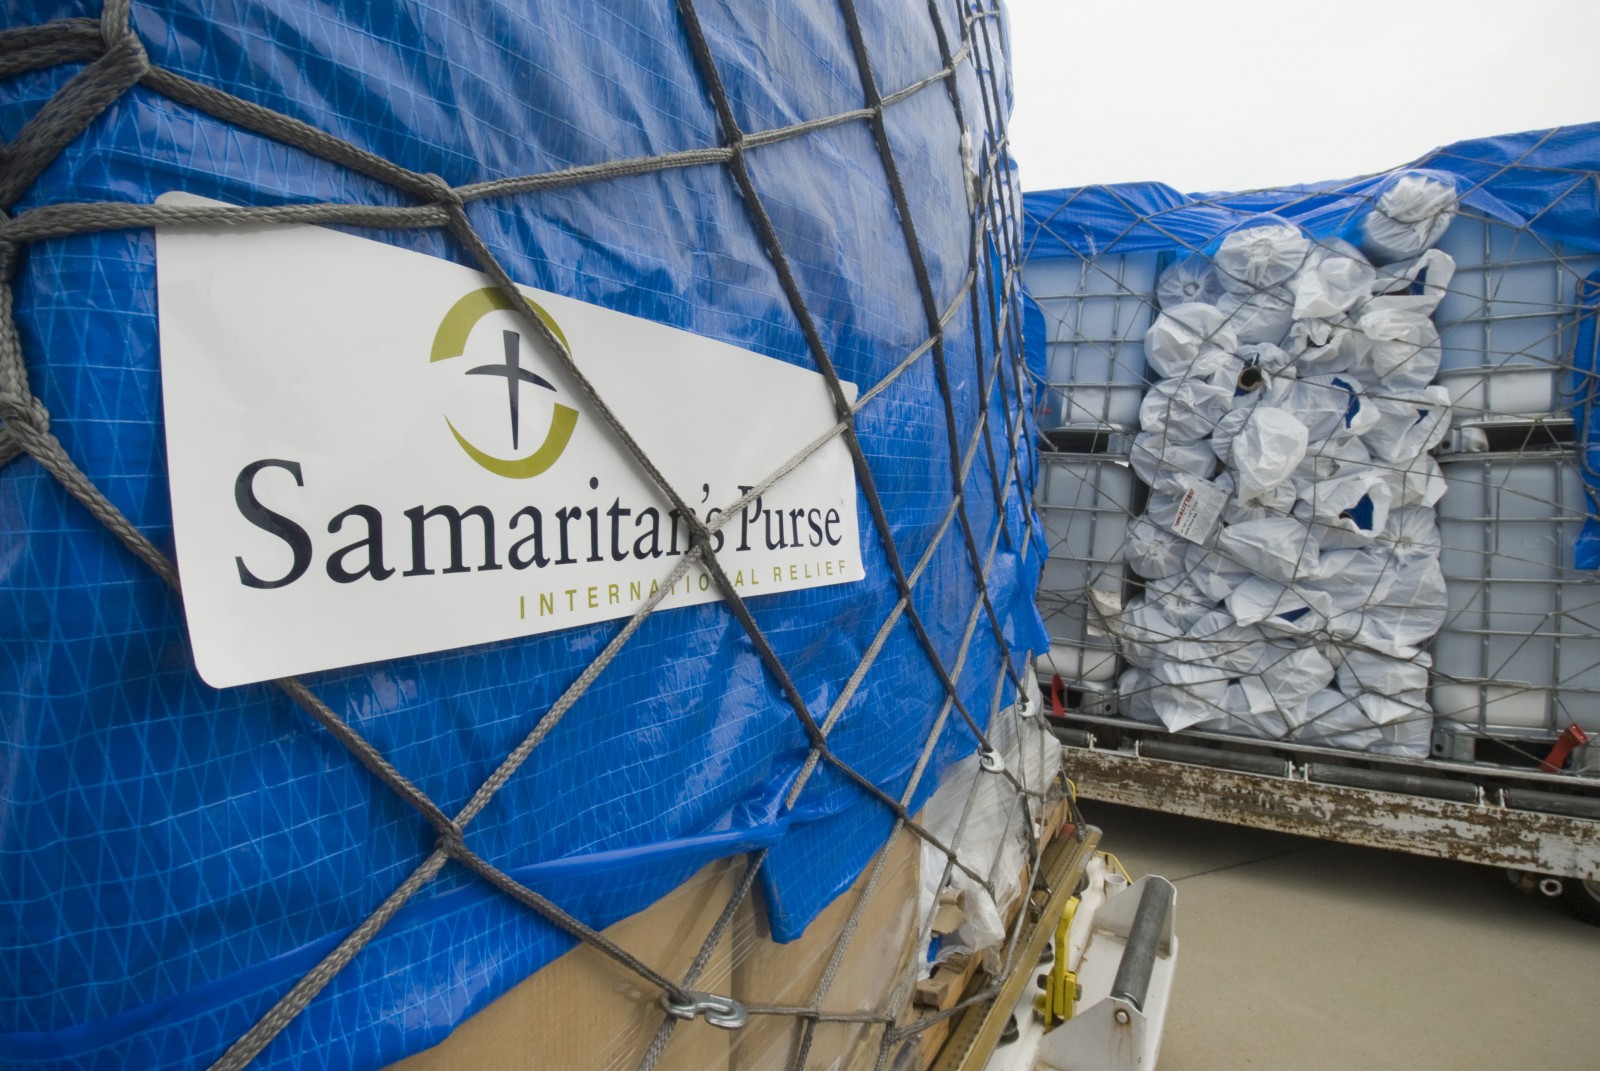 Samaritan's Purse is an international Christian relief organization working in more than 100 countries to provide aid to victims of war, disease, natural disaster, poverty, famine and persecution.